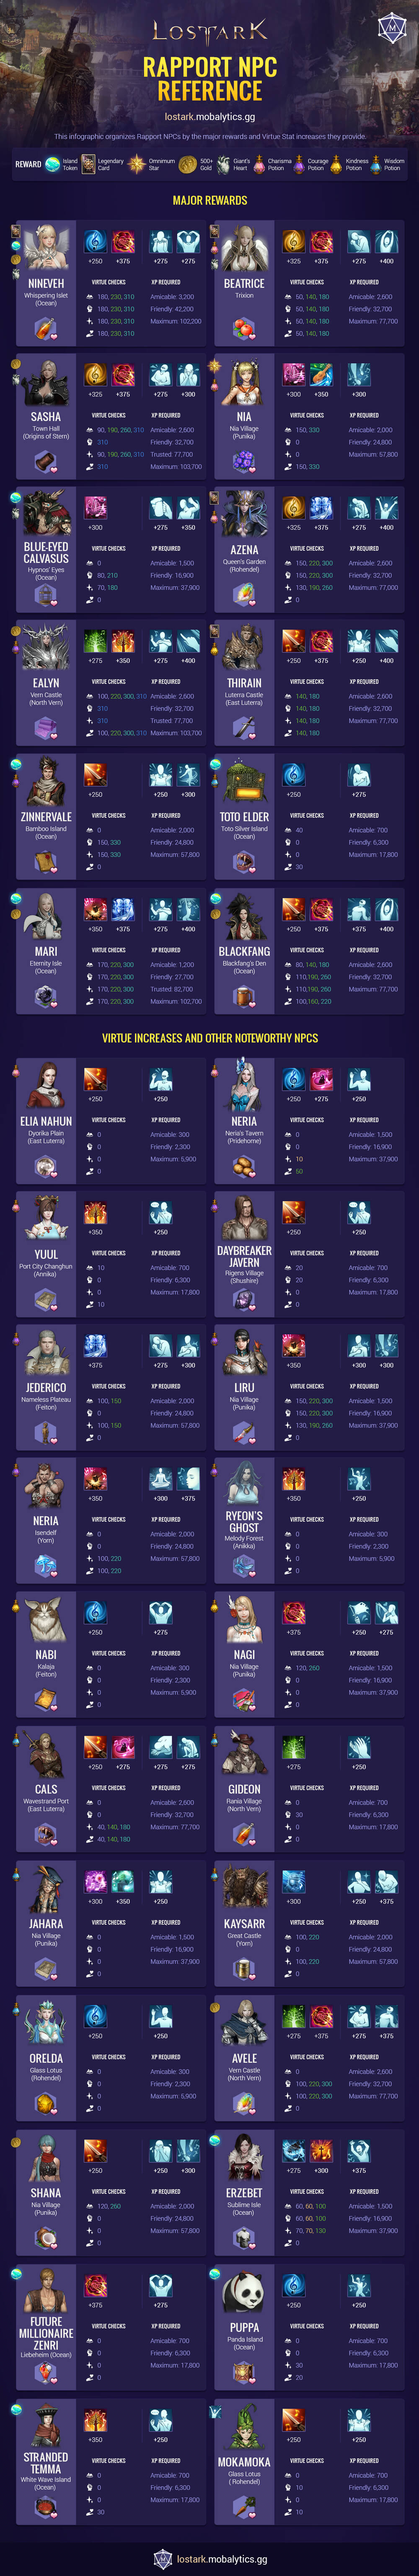 Lost Ark Rapport Infographic + NPCs and Rewards - Rapport Infographic - 216CD25